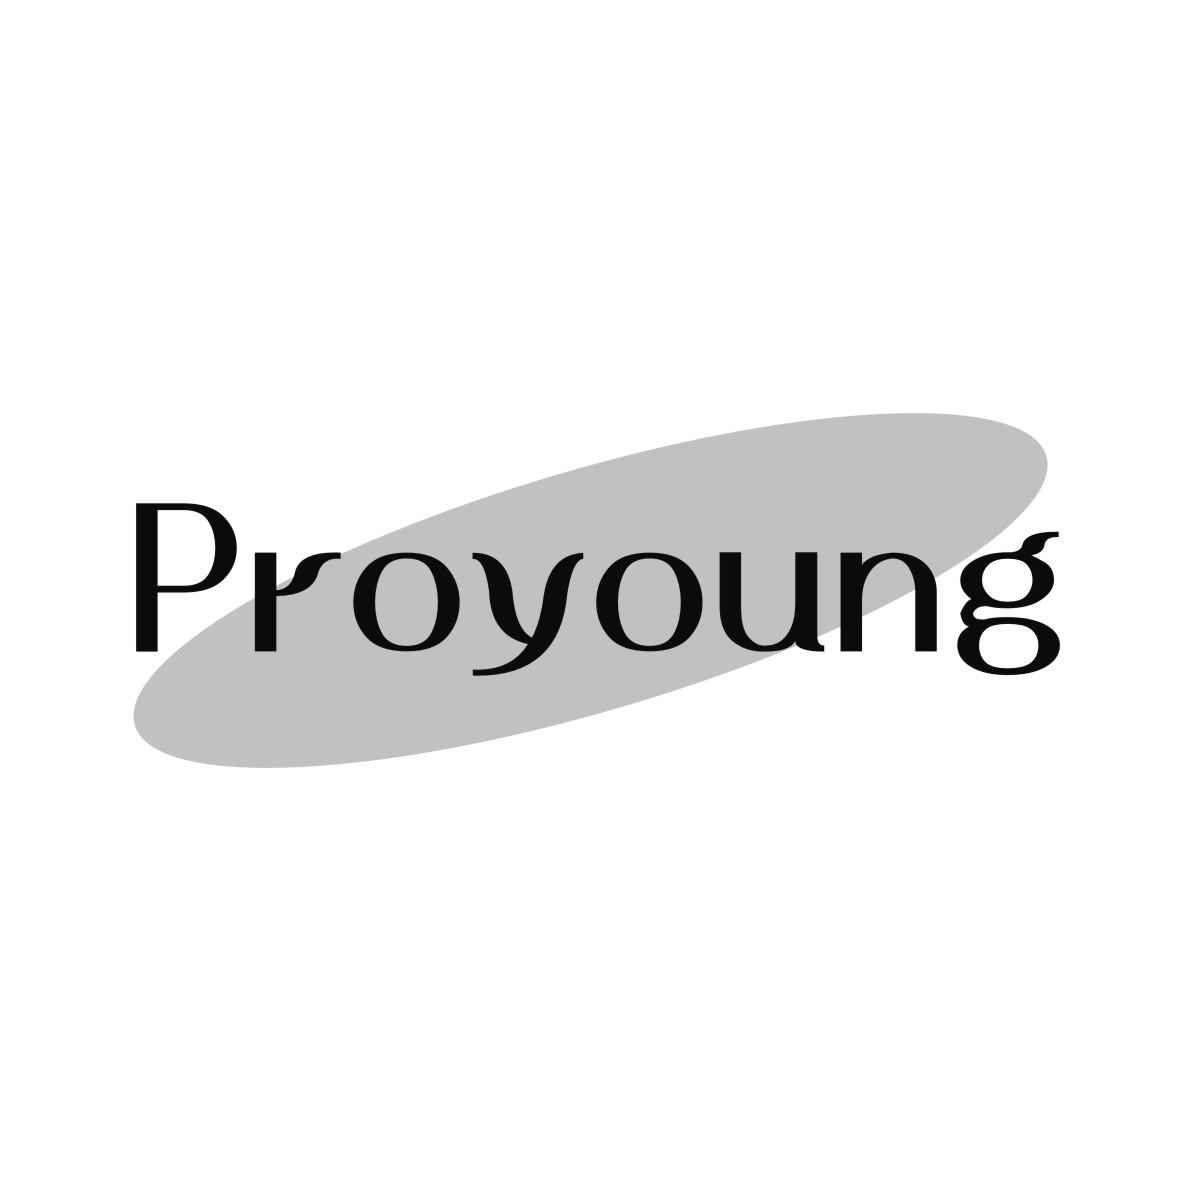 PROYOUNG